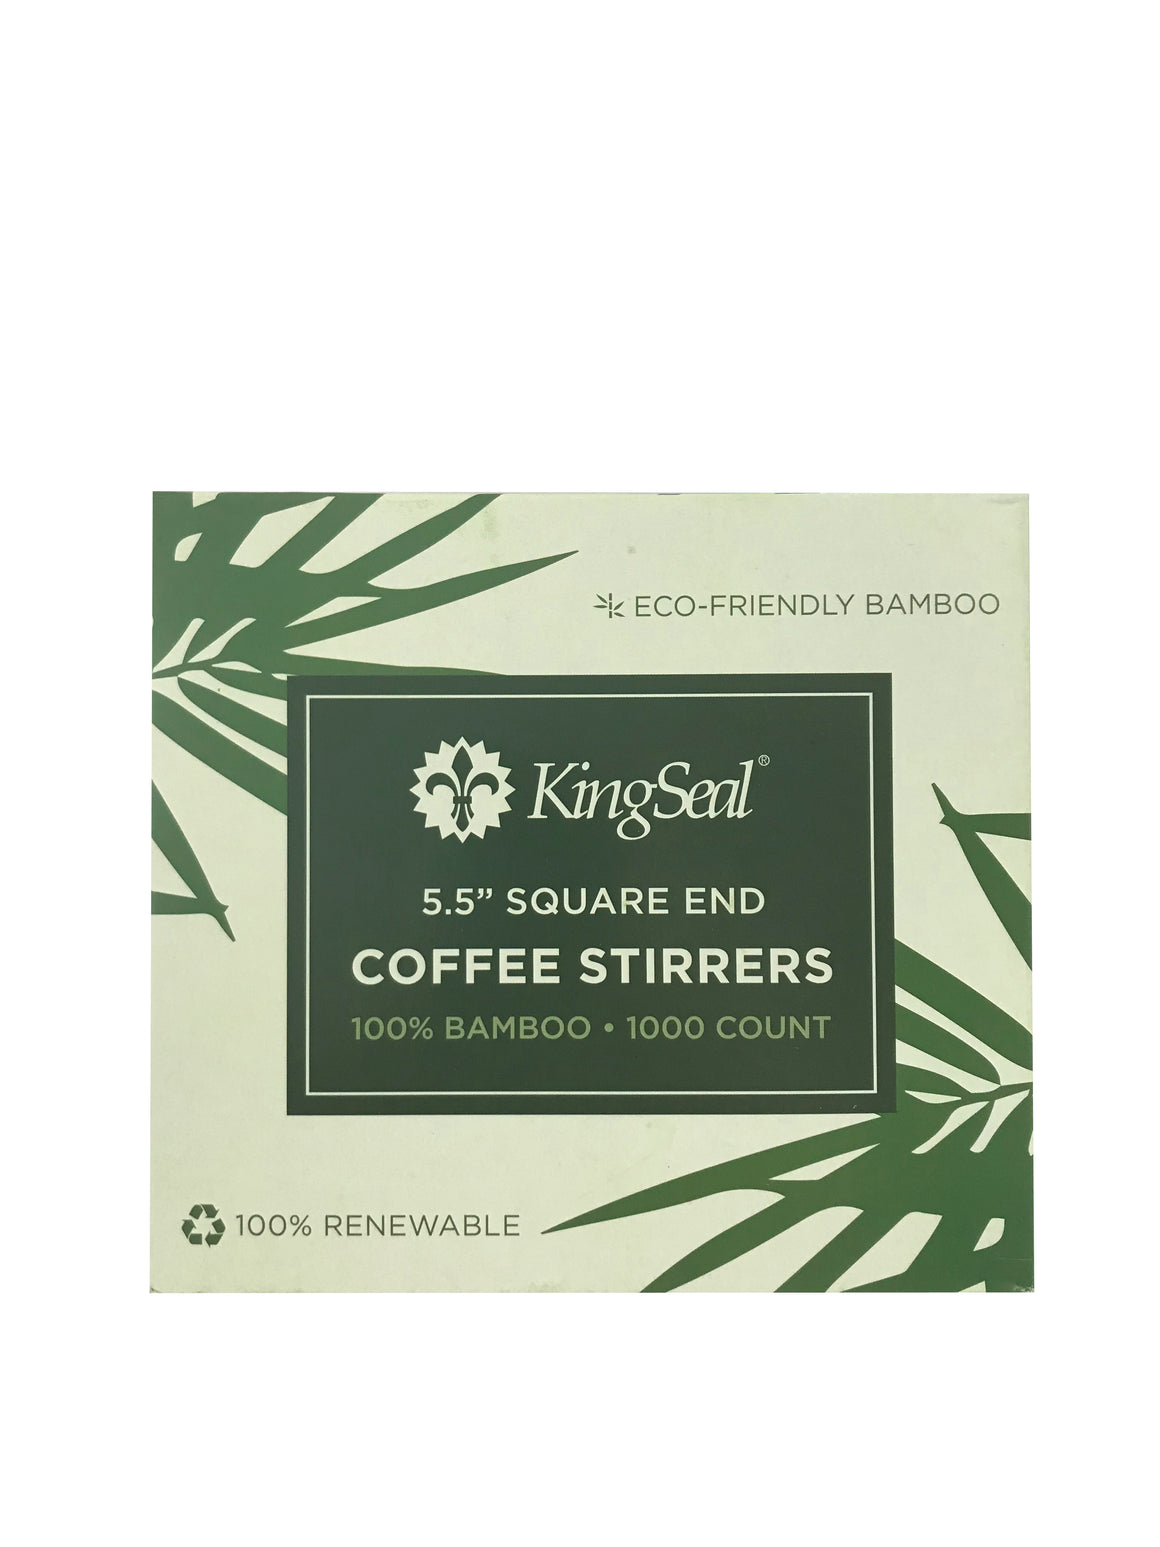 KingSeal Bamboo Coffee Stirrers, Square End - 5.5 Inch, 100% Renewable and Biodegradable